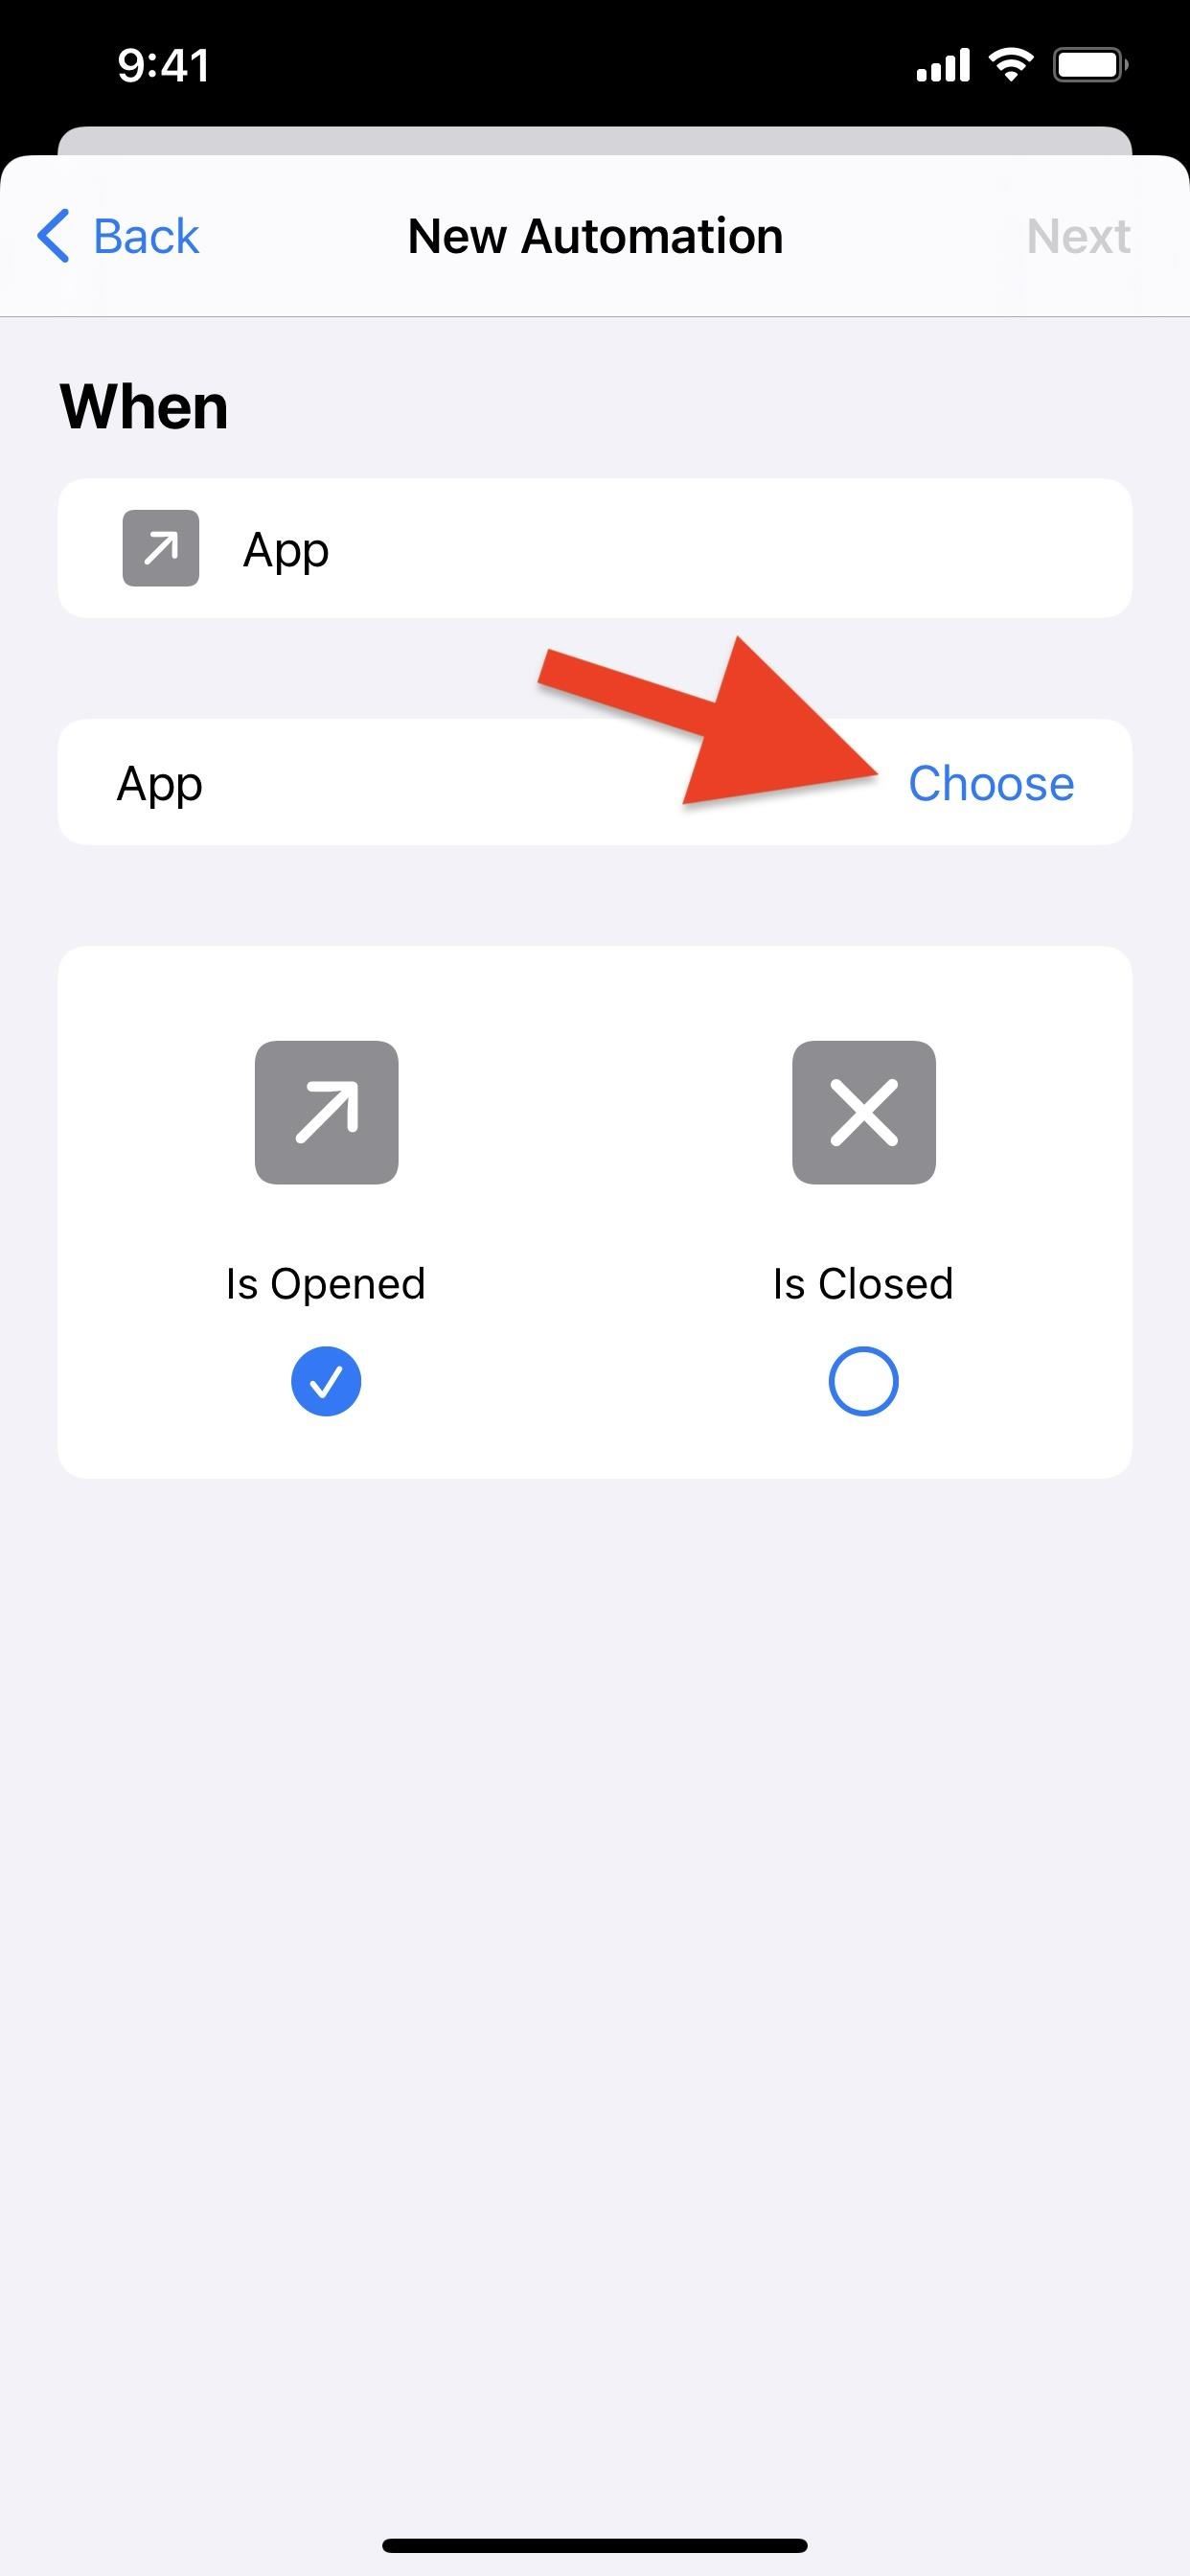 How to Change the Color Theme of Any App Interface on Your iPhone — Without Affecting the Rest of iOS